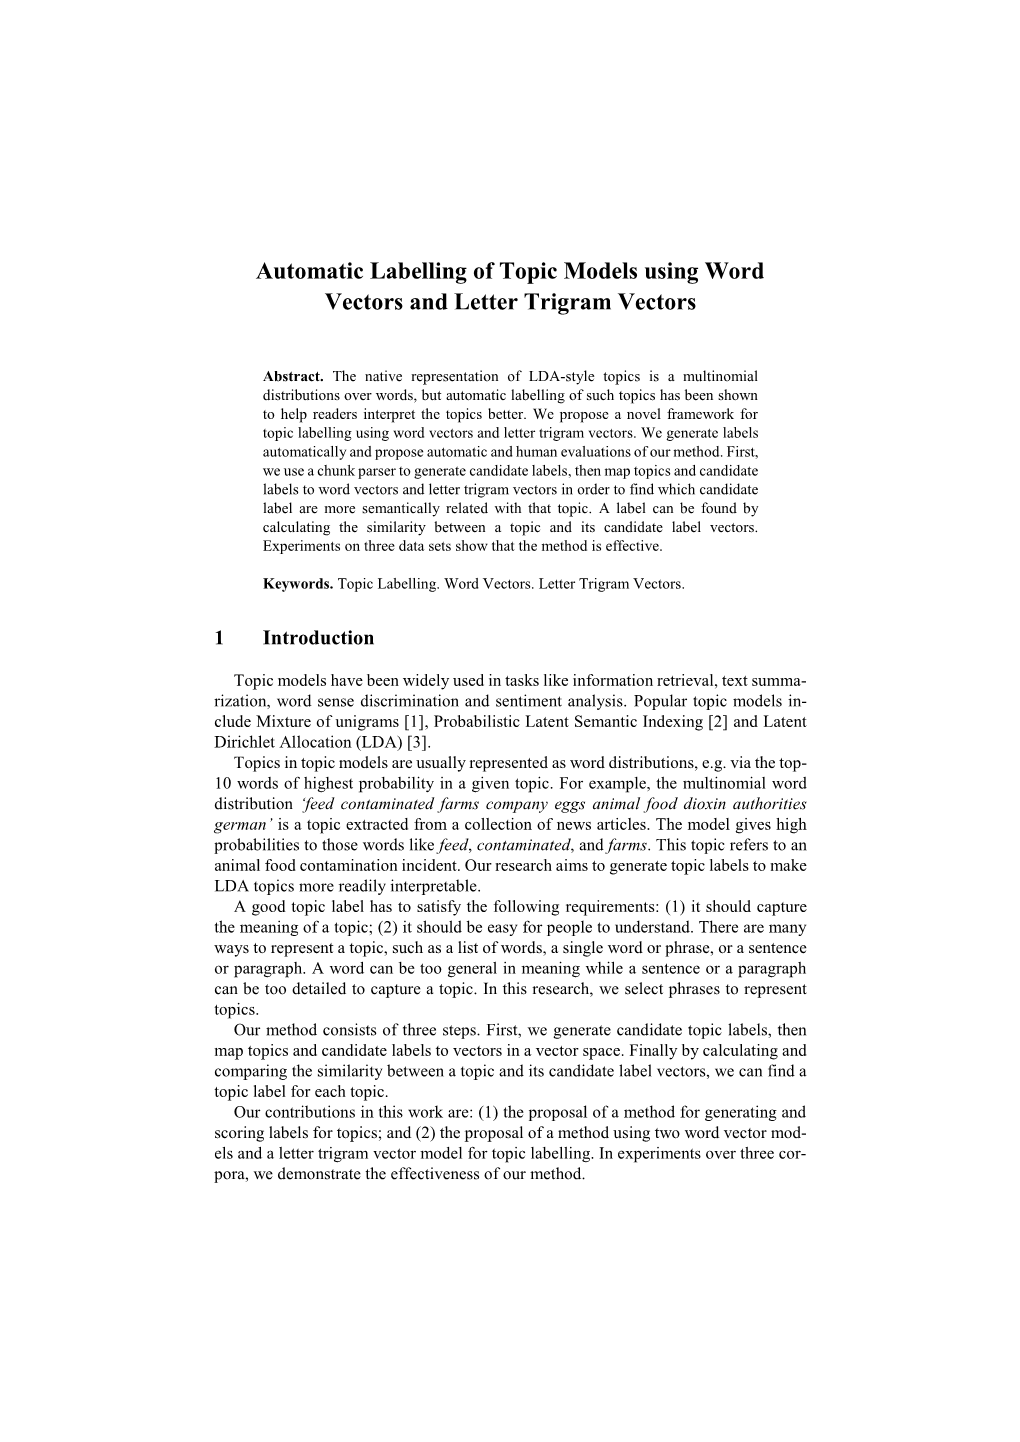 Automatic Labelling of Topic Models Using Word Vectors and Letter Trigram Vectors